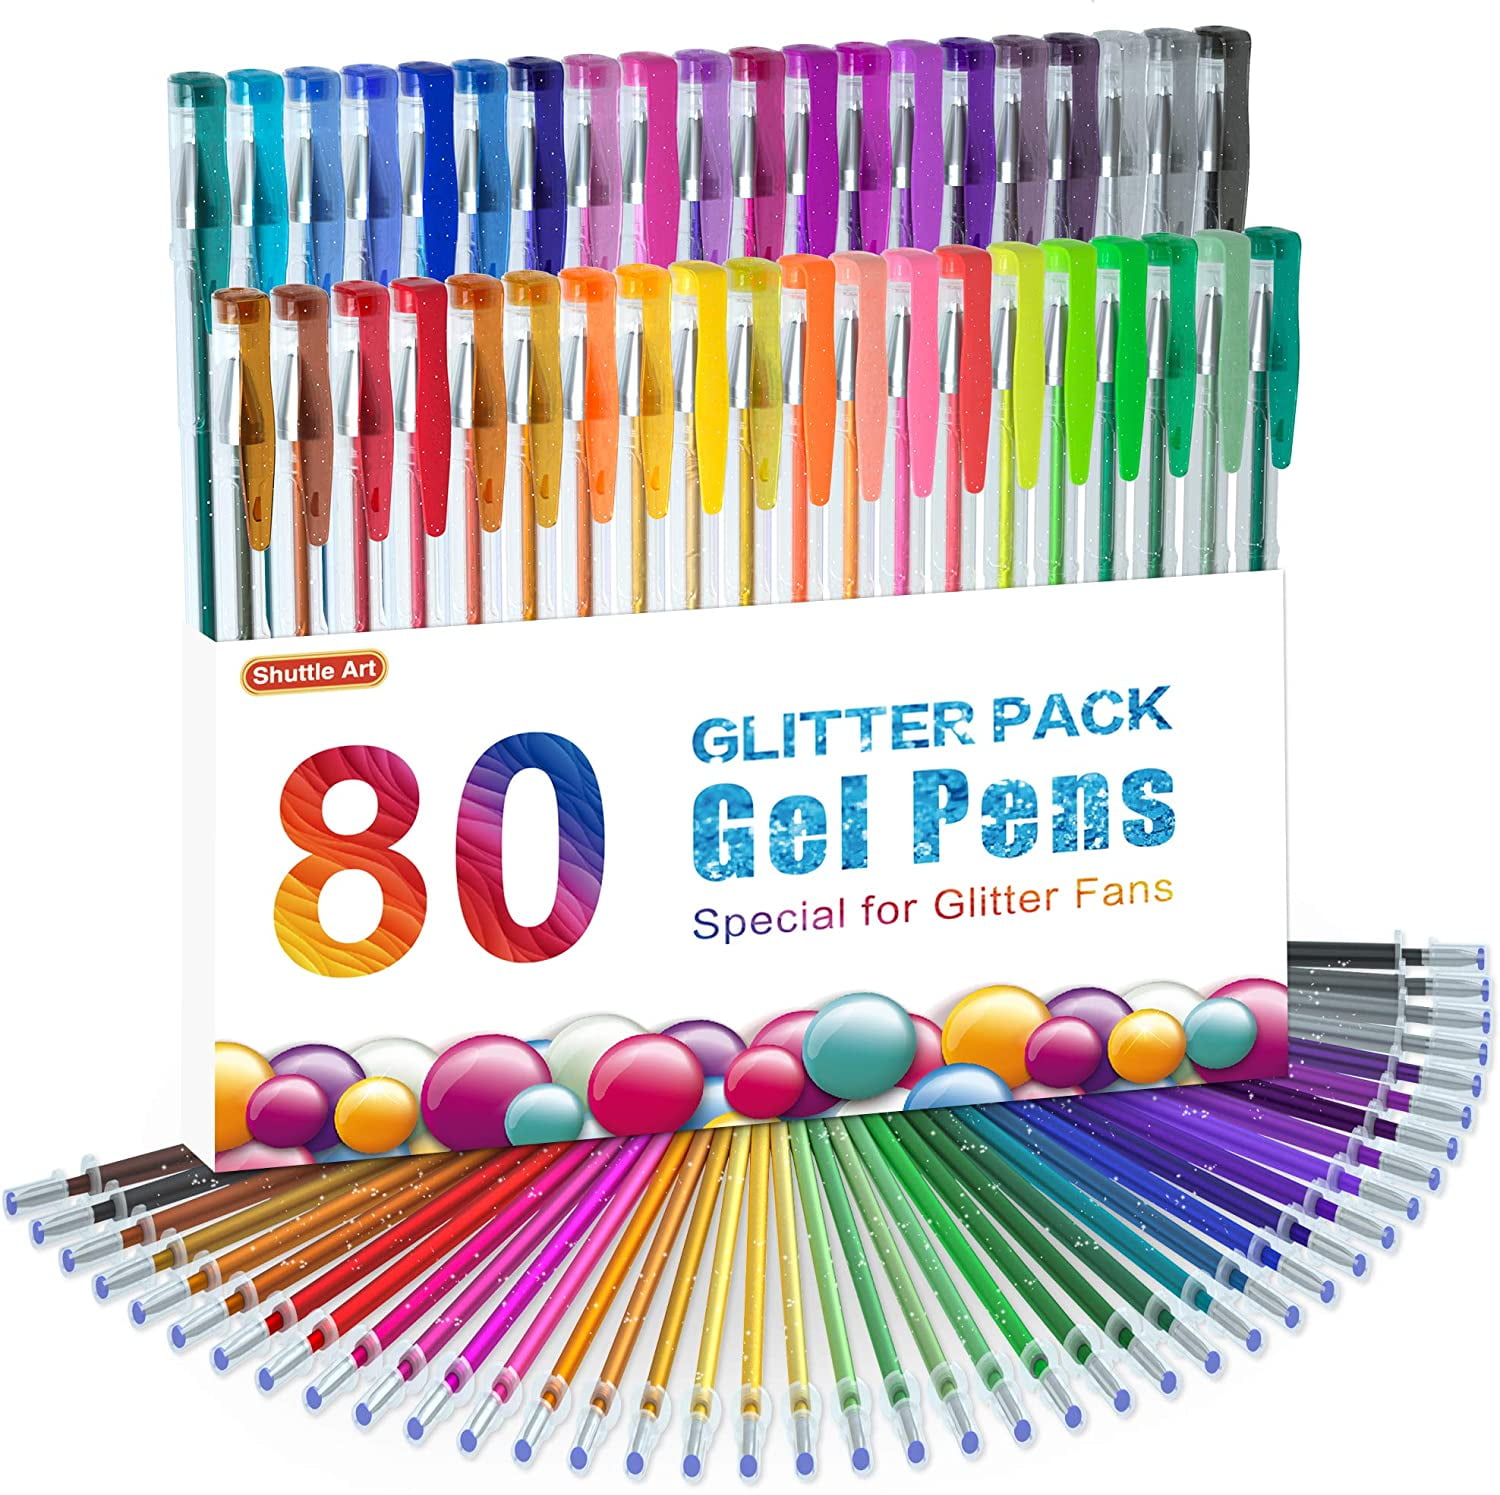 Nylea 100 Pack Glitter Gel Pens for Adult Coloring with Silk Travel Case 